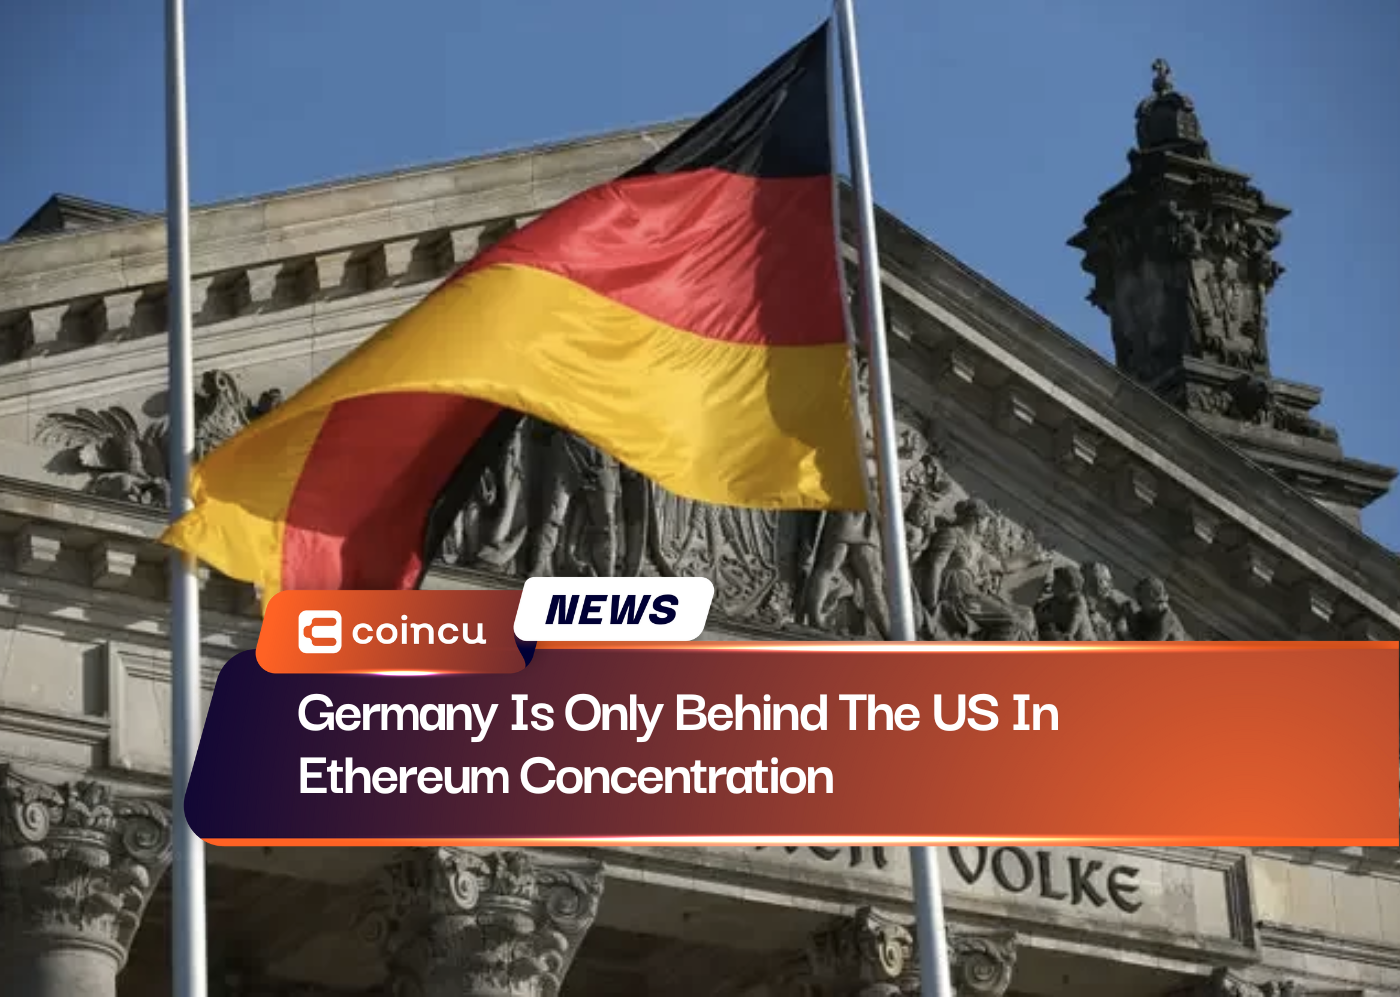 Germany Is Only Behind The US In Ethereum Concentration